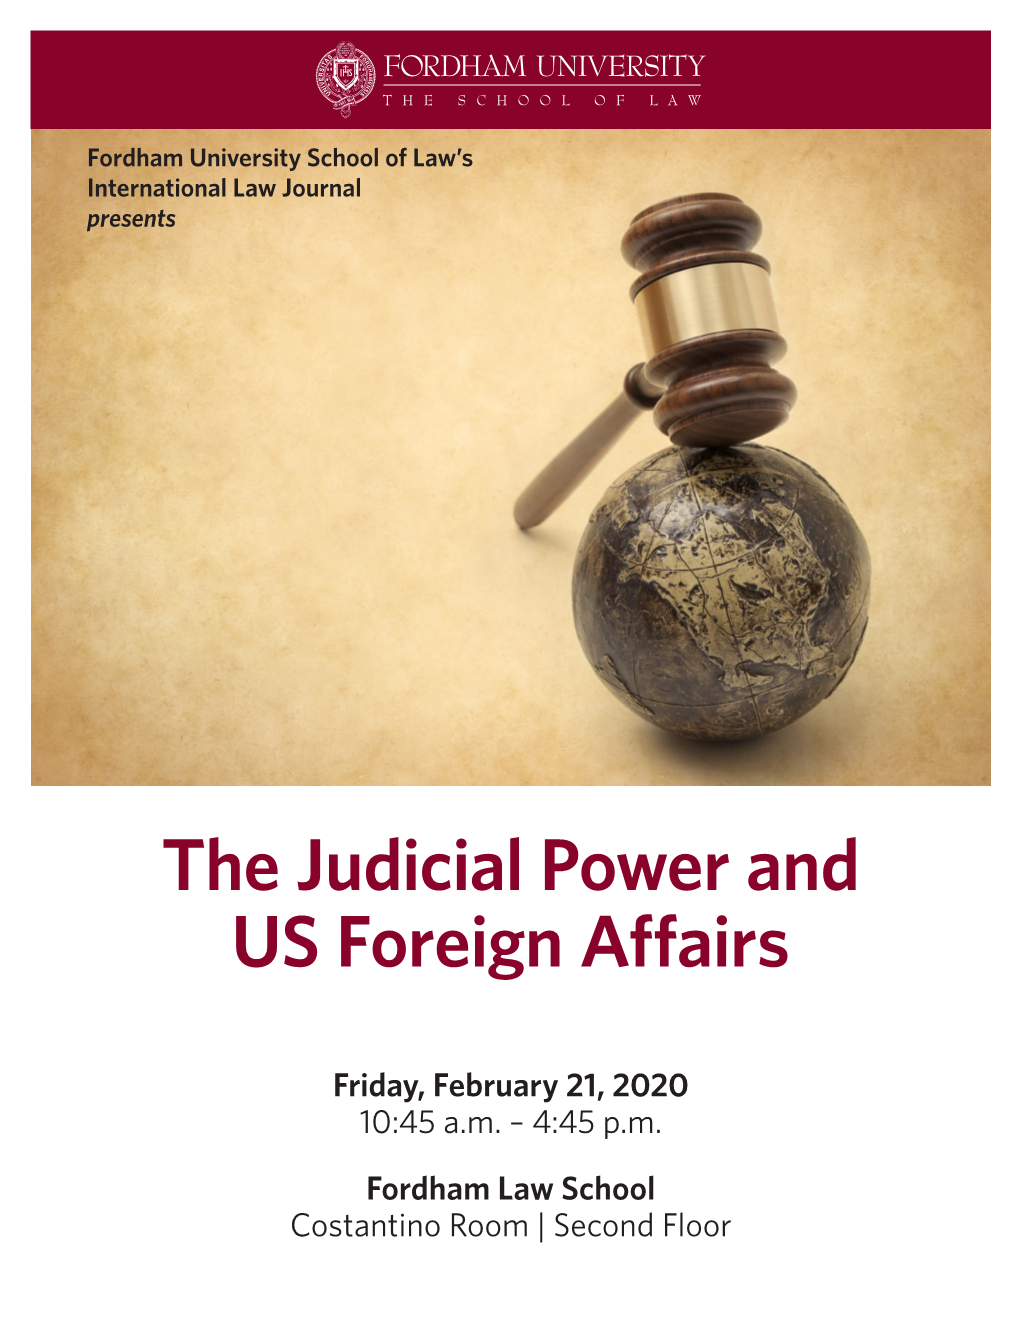 The Judicial Power and US Foreign Affairs